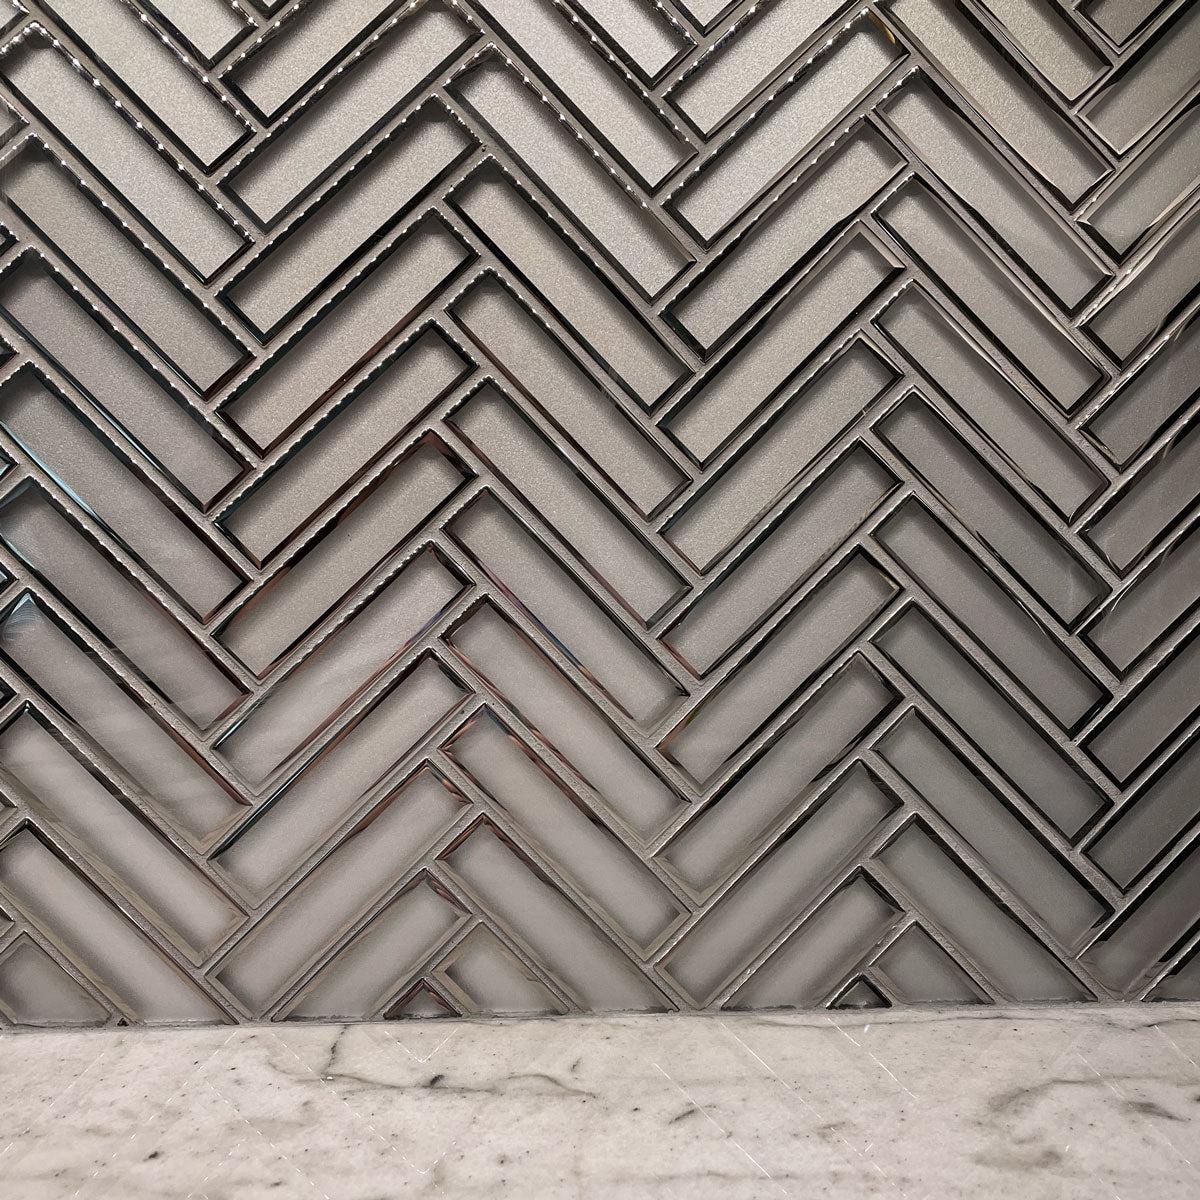 Frosted Glass and Chrome finish for an Art Deco-inspired herringbone glass tile